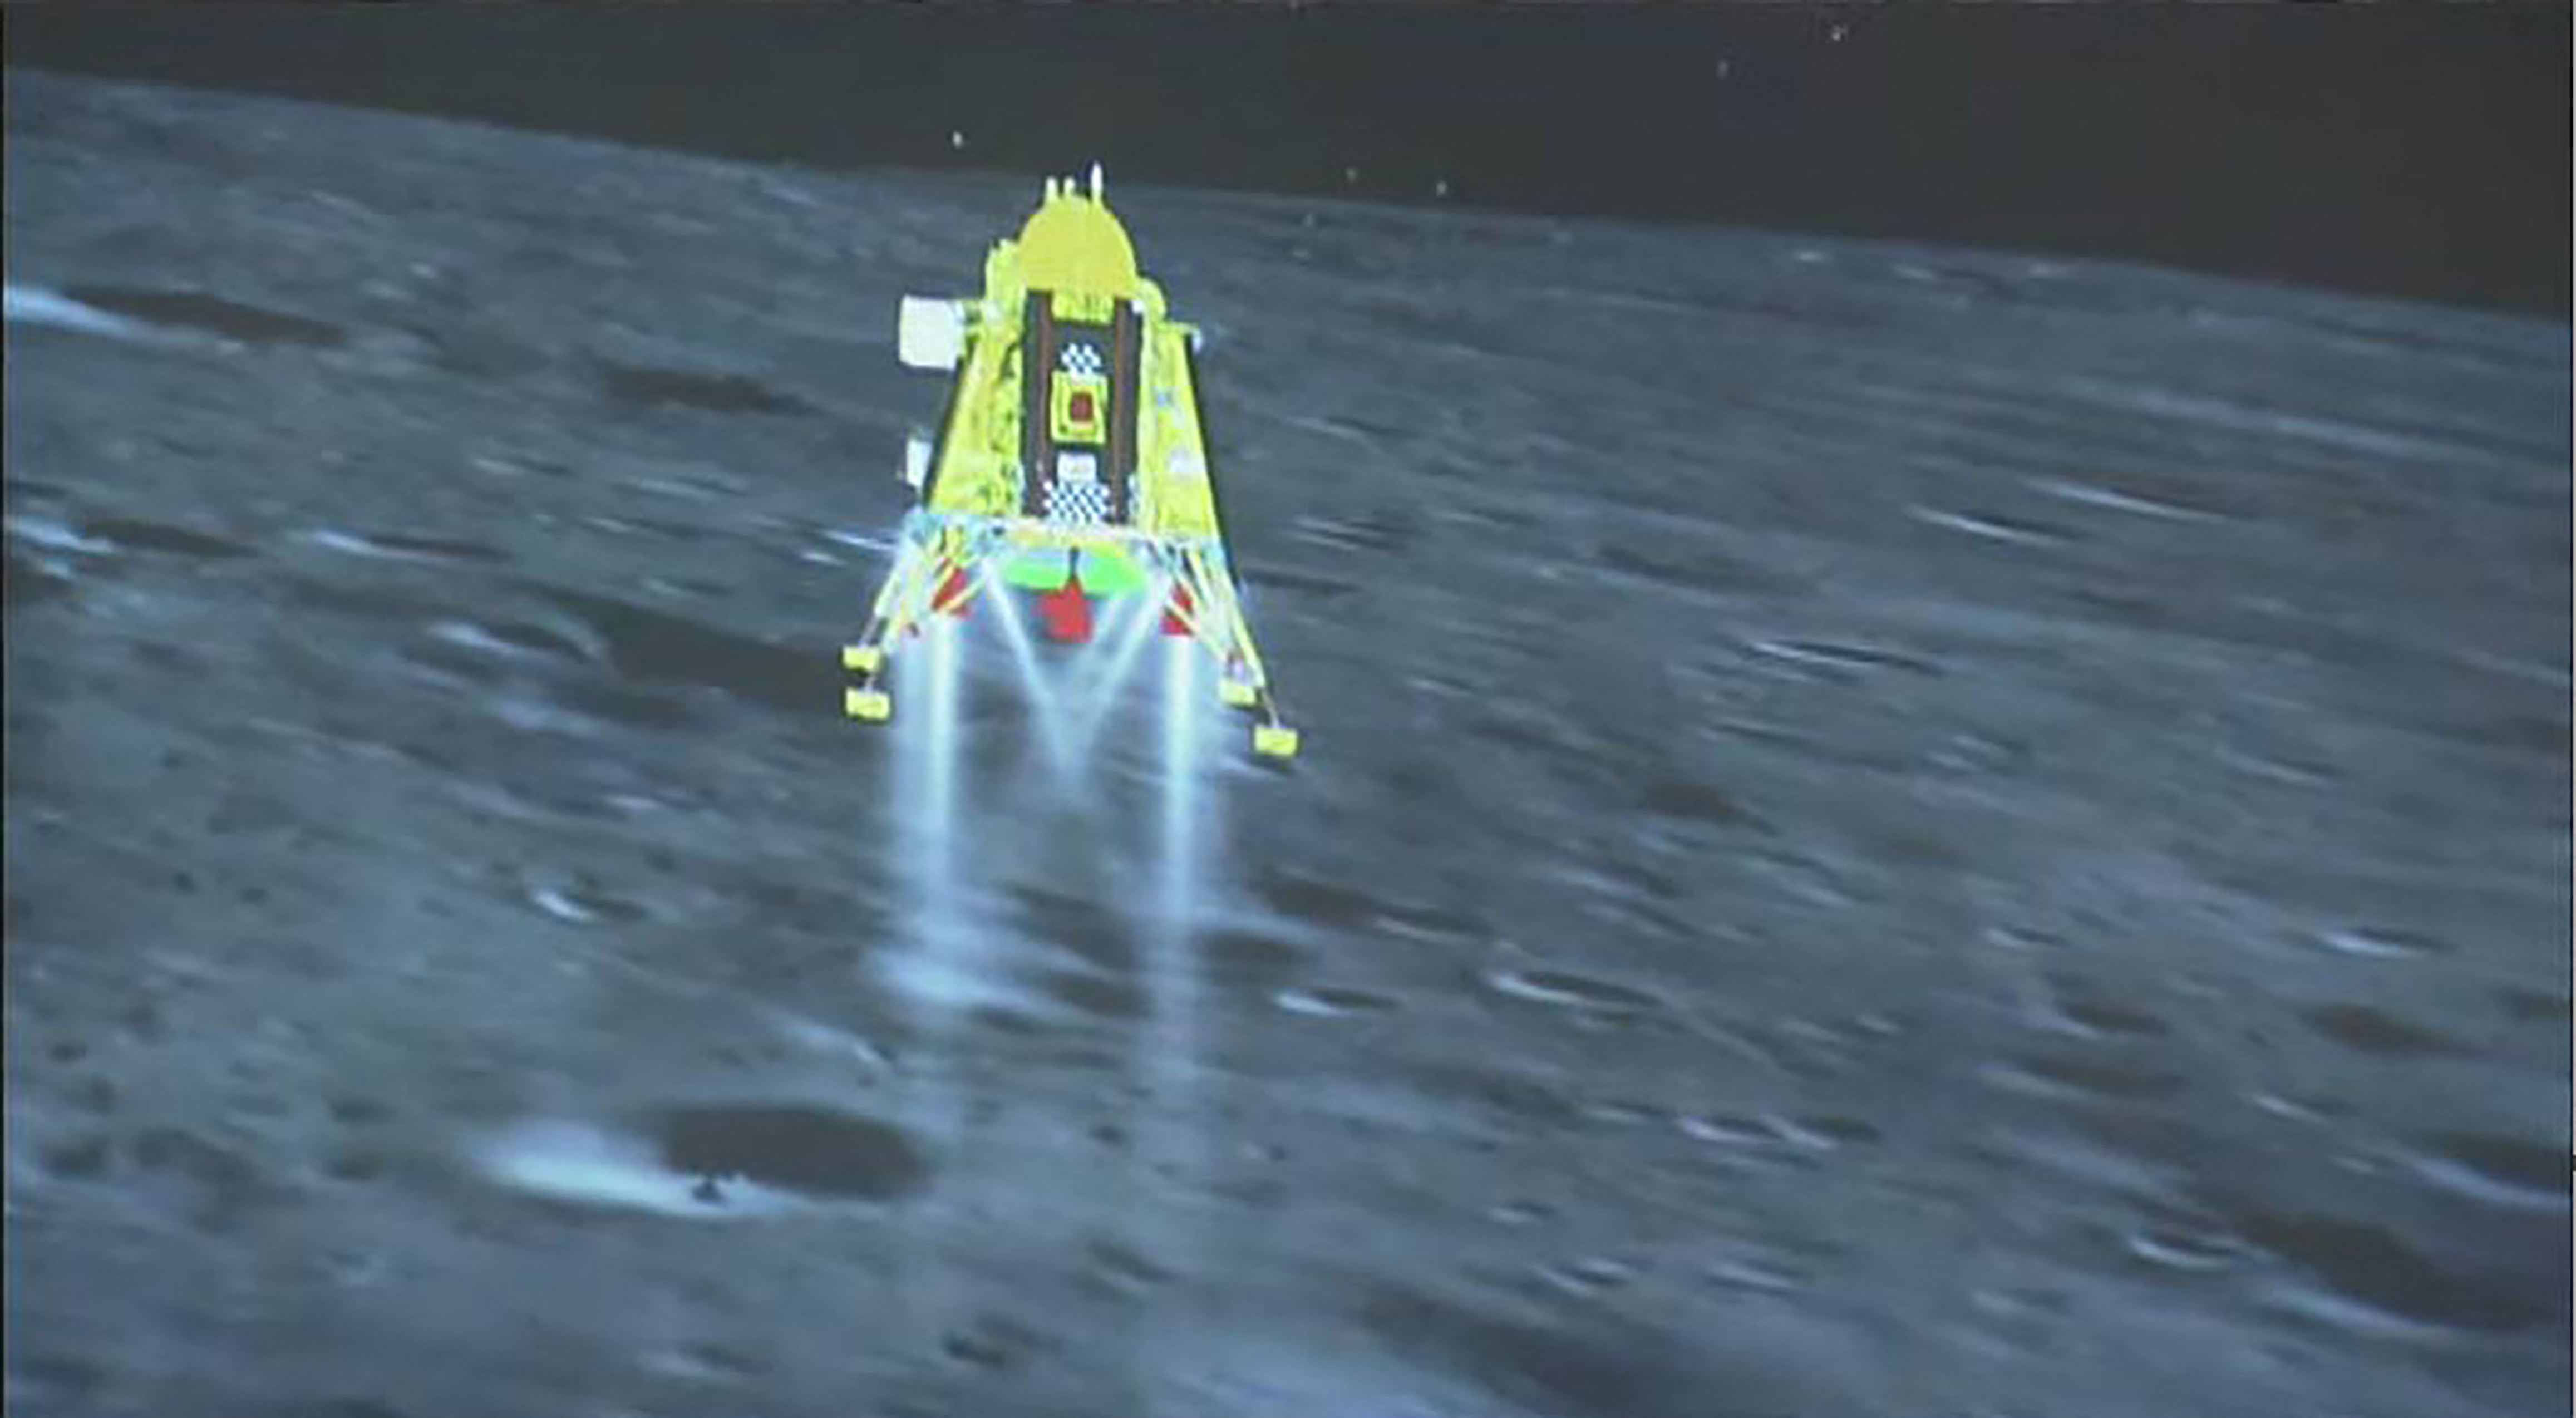 India lands a spacecraft softly on the moon’s surface